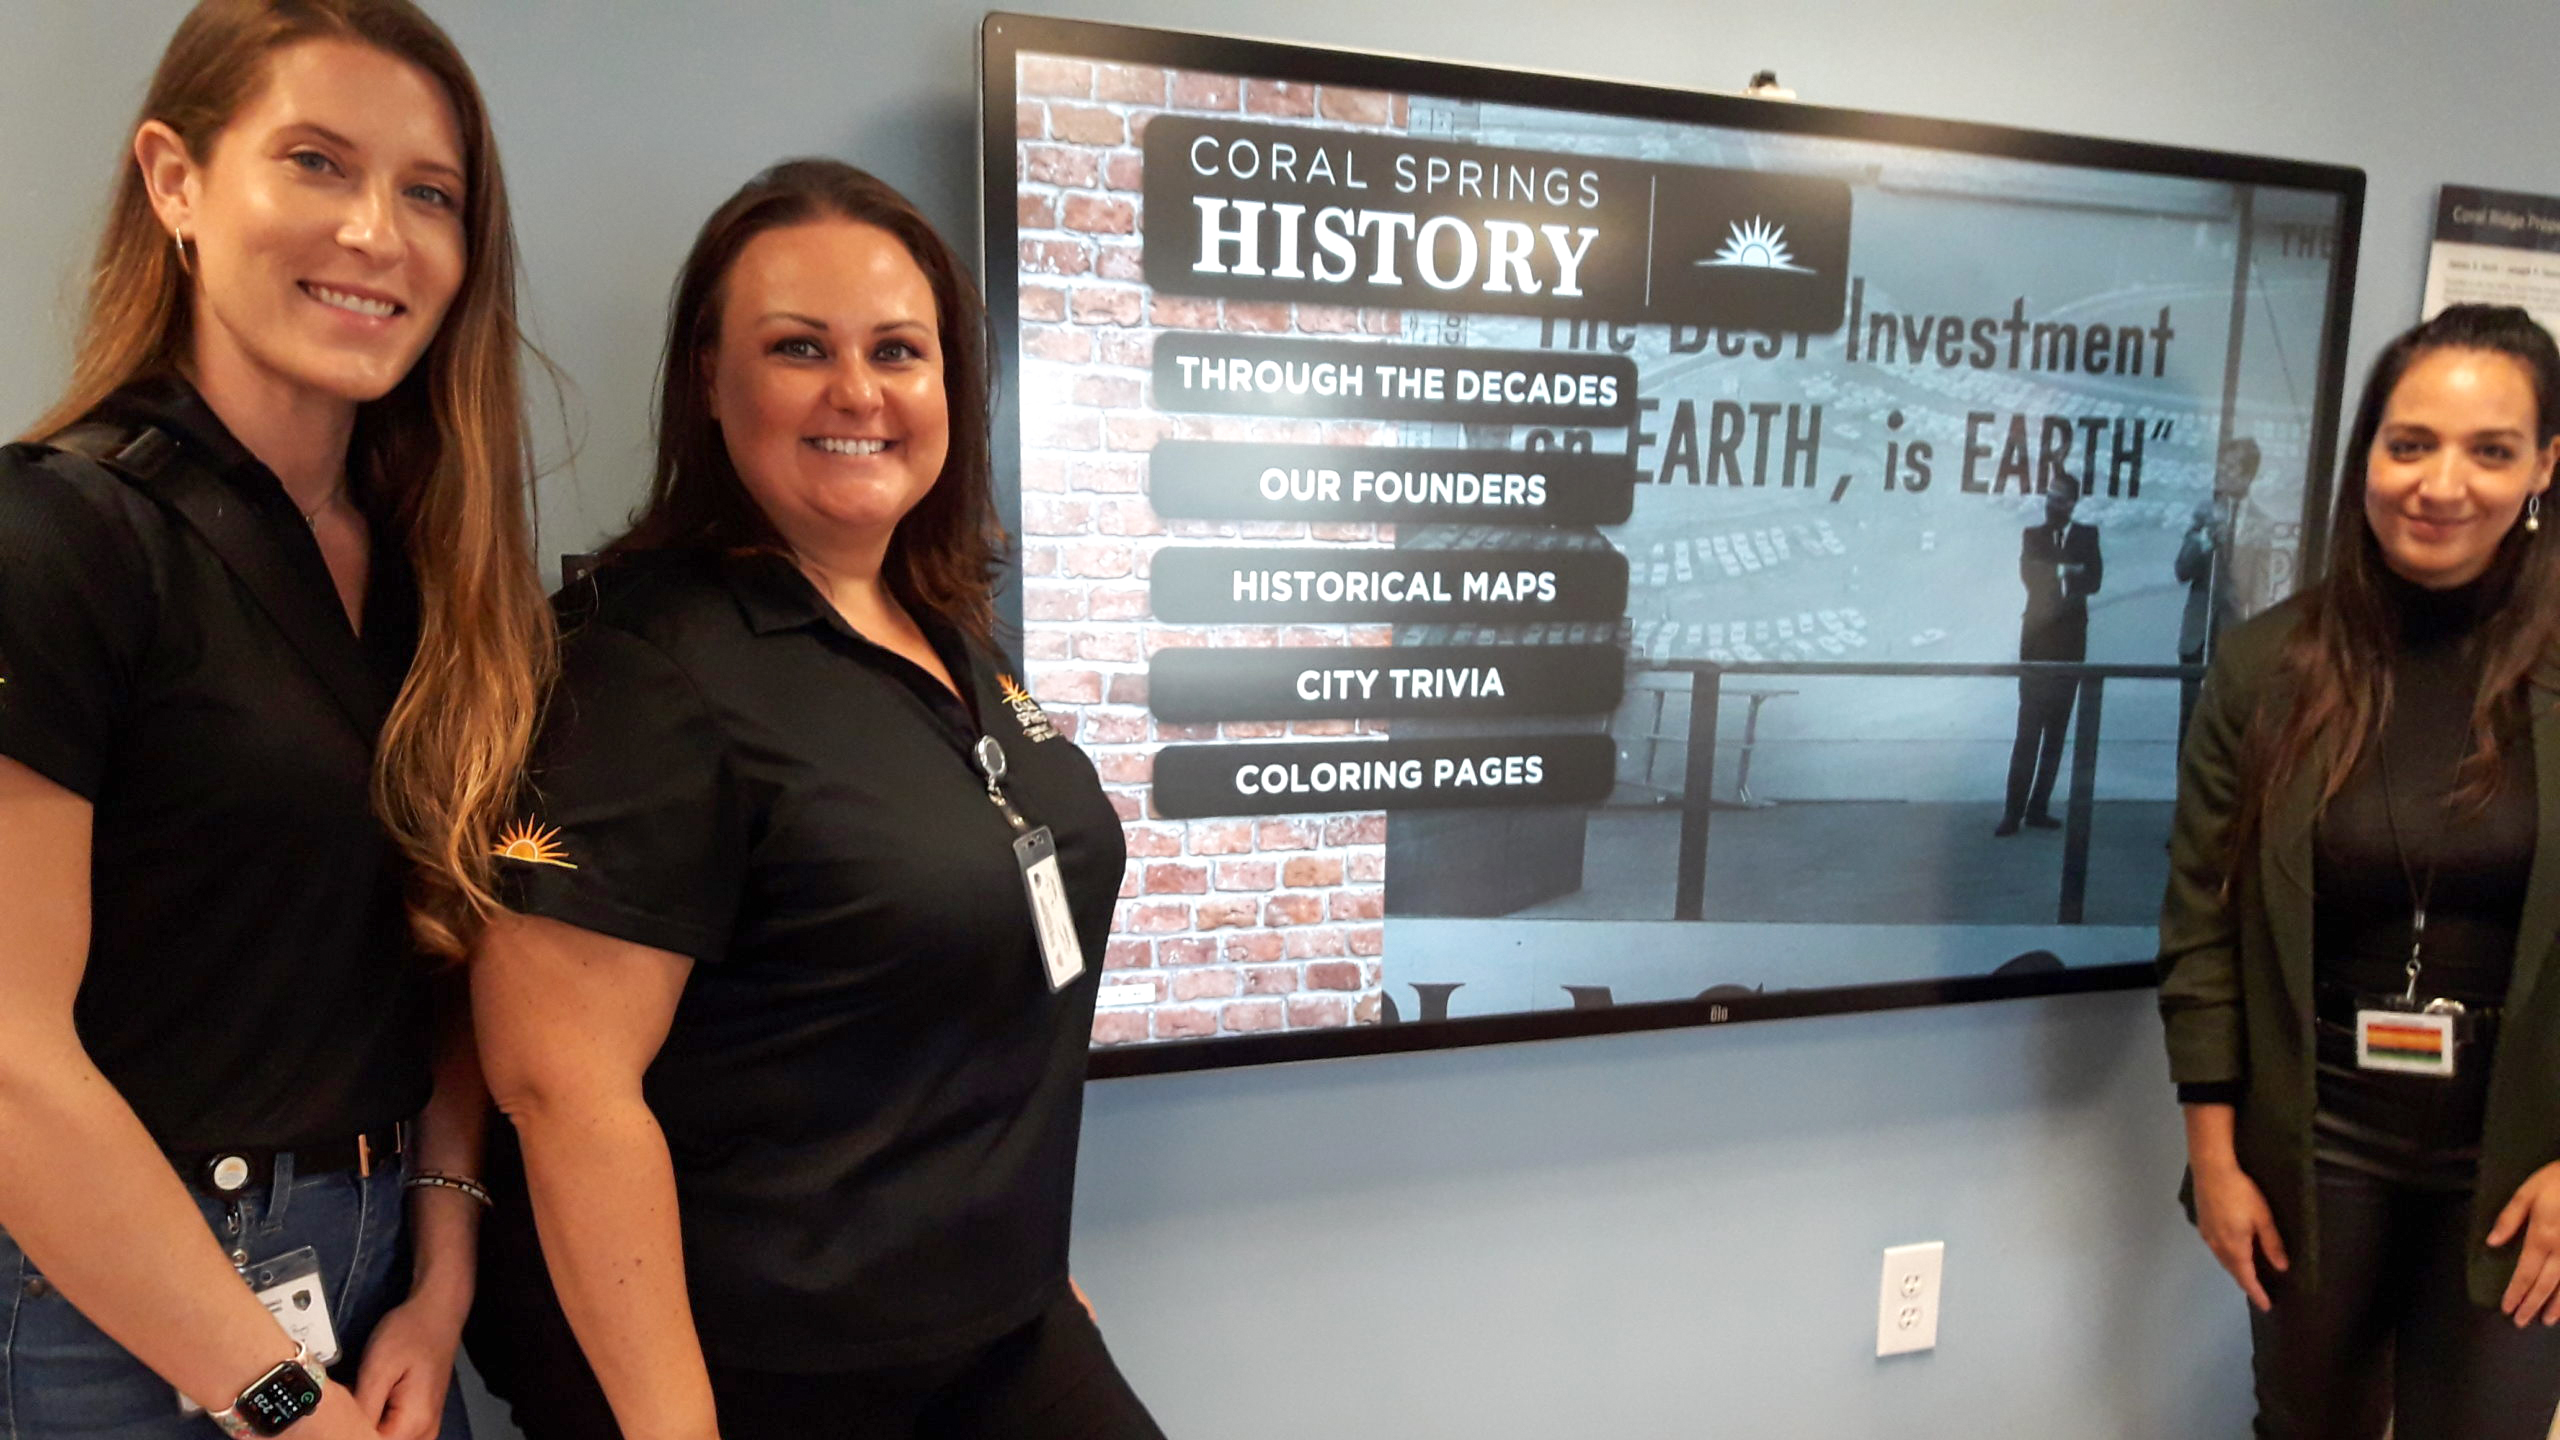 Museum of Coral Springs History Newly Updated with Interactive Learning Experience